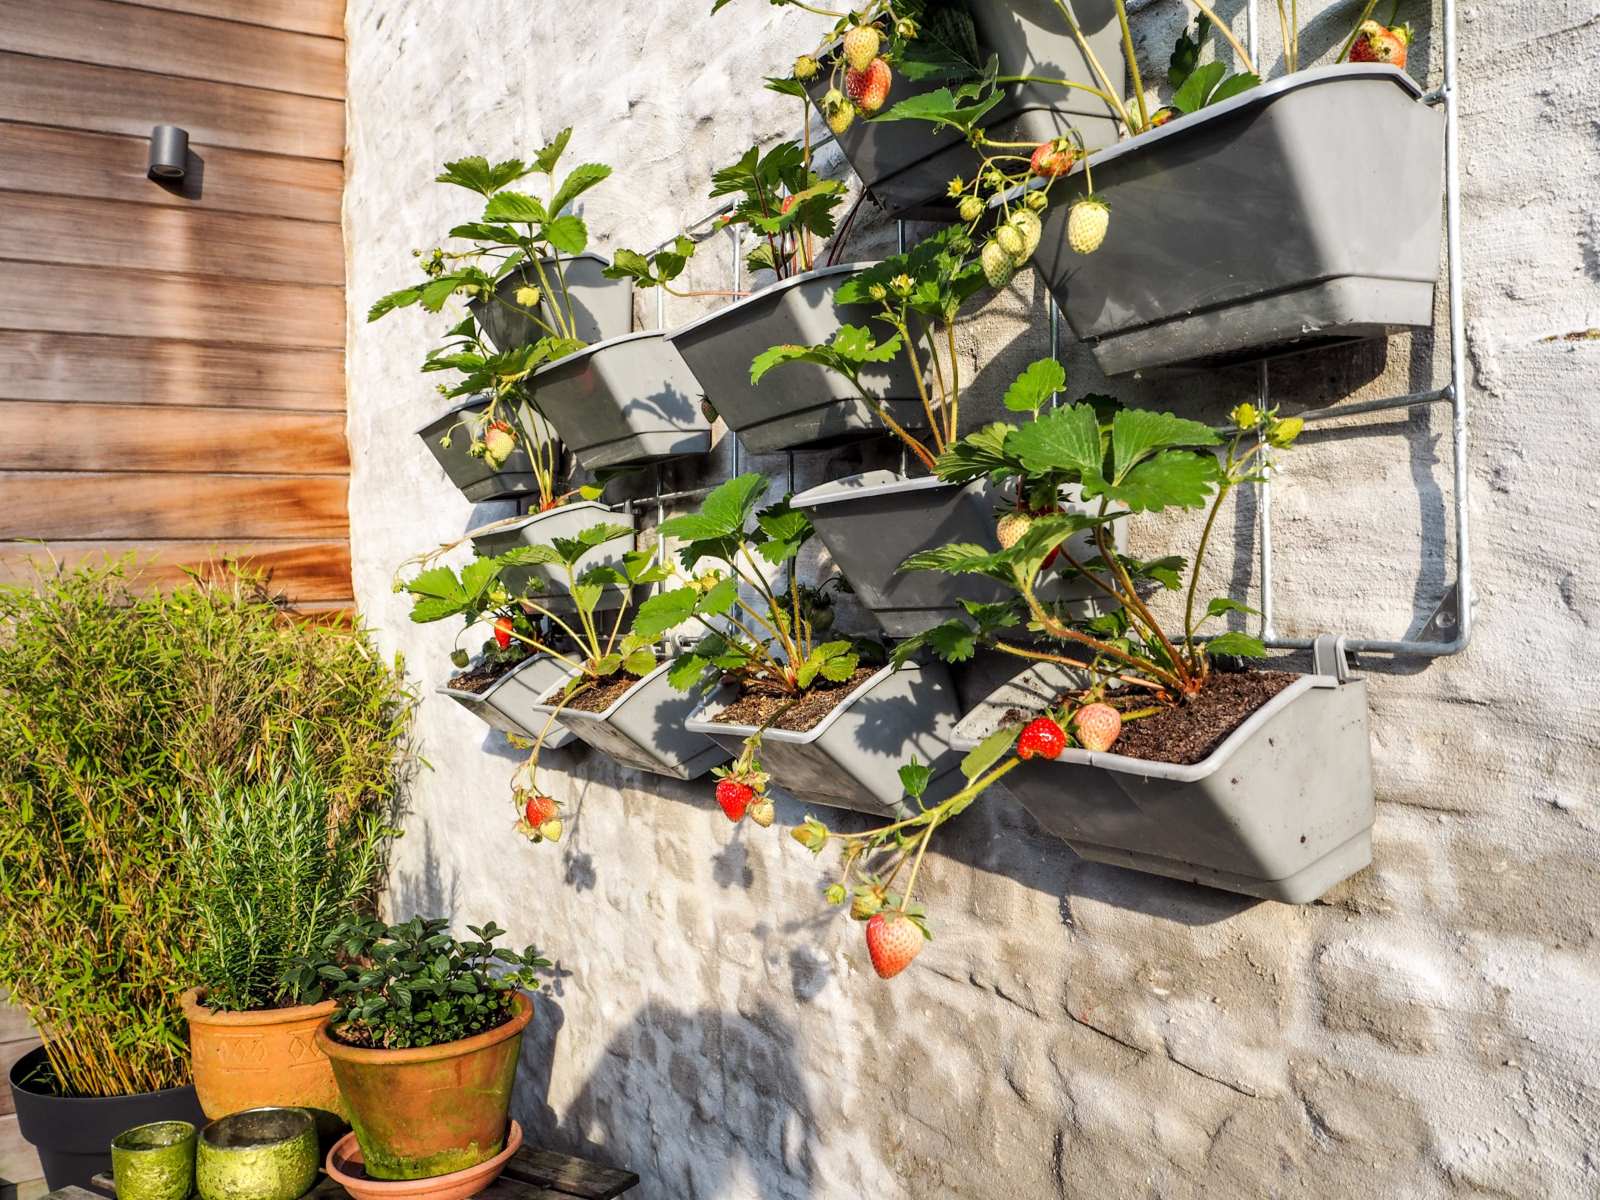 How To Plant Strawberry In A Vertical Garden